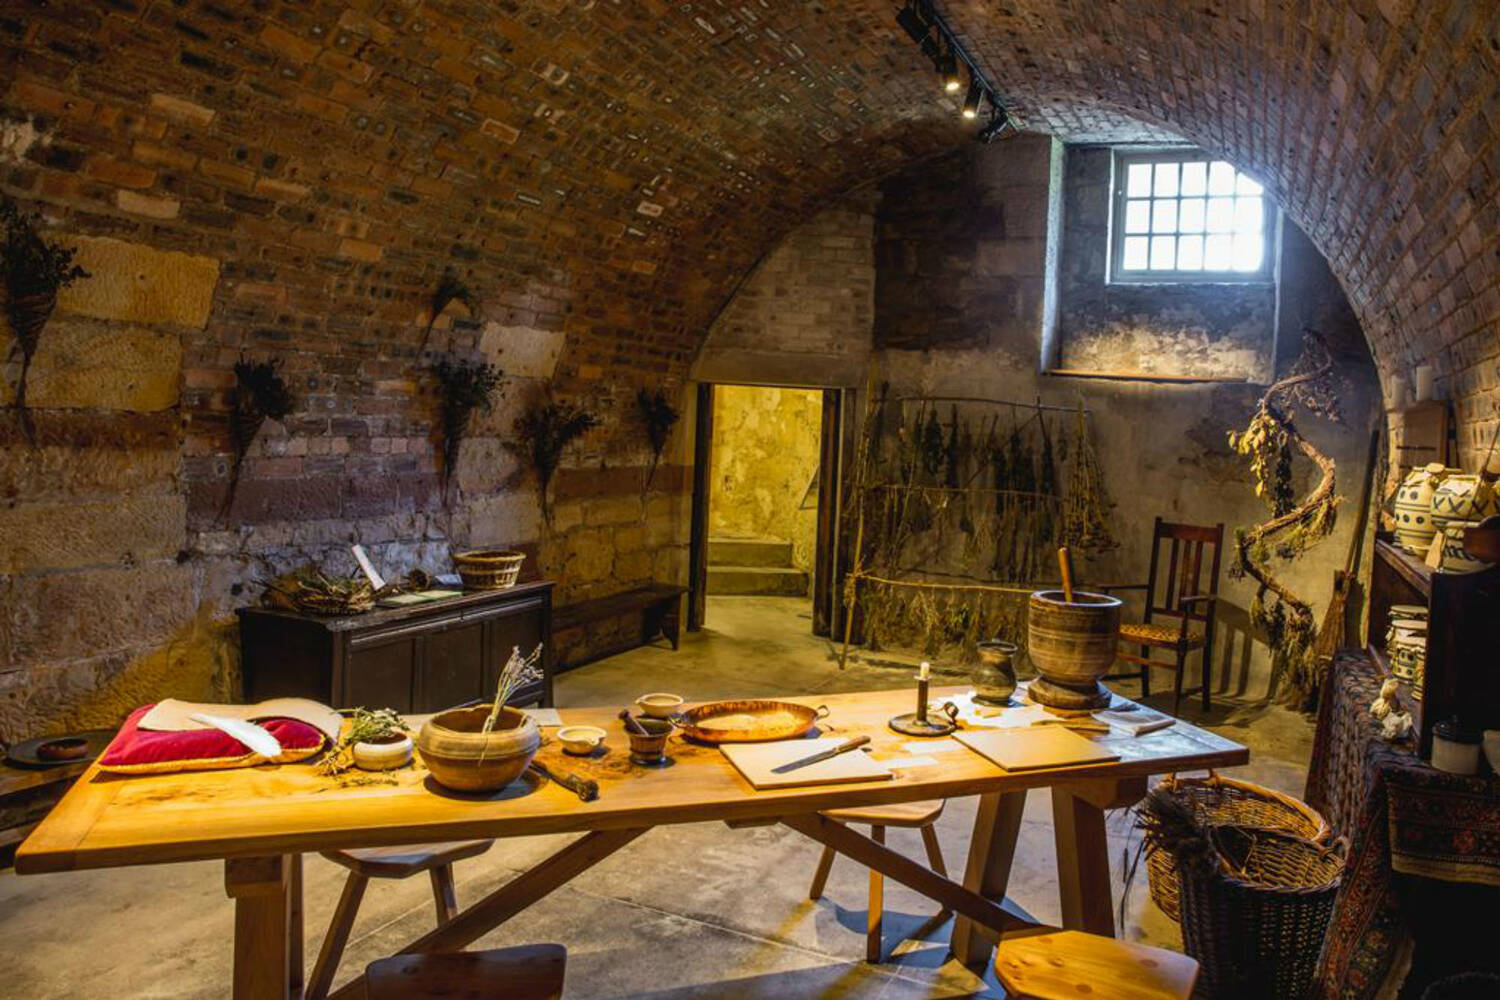 The new apothecary room in the cellars at Falkland Palace